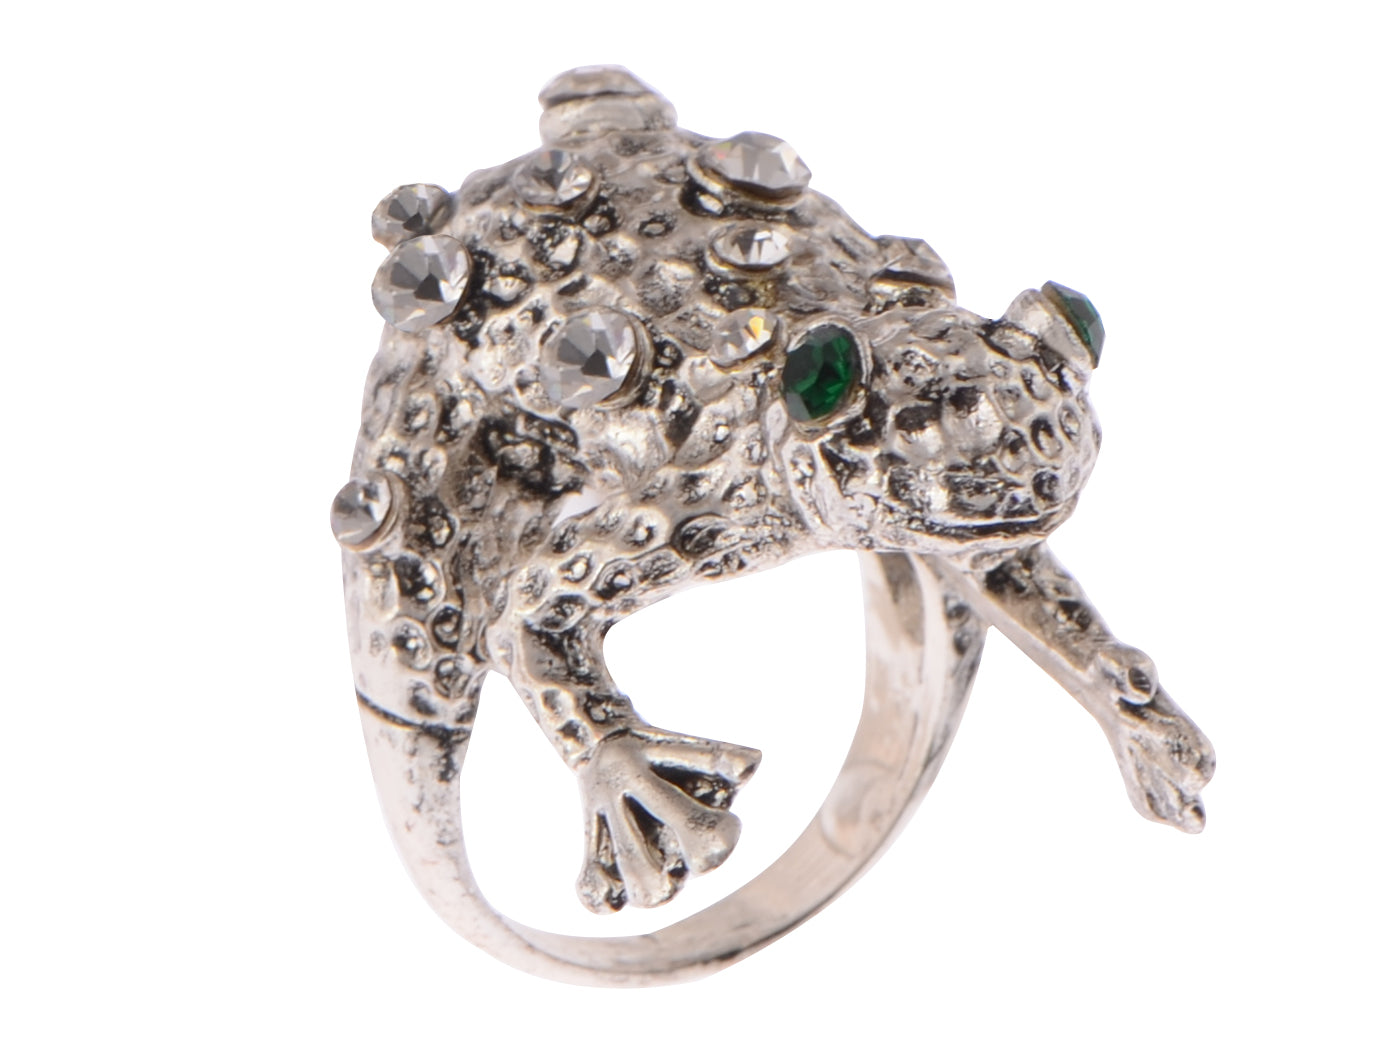 Spotted Frog Emerald Eyed Silver Hugging Toad Lovely Sized Ring